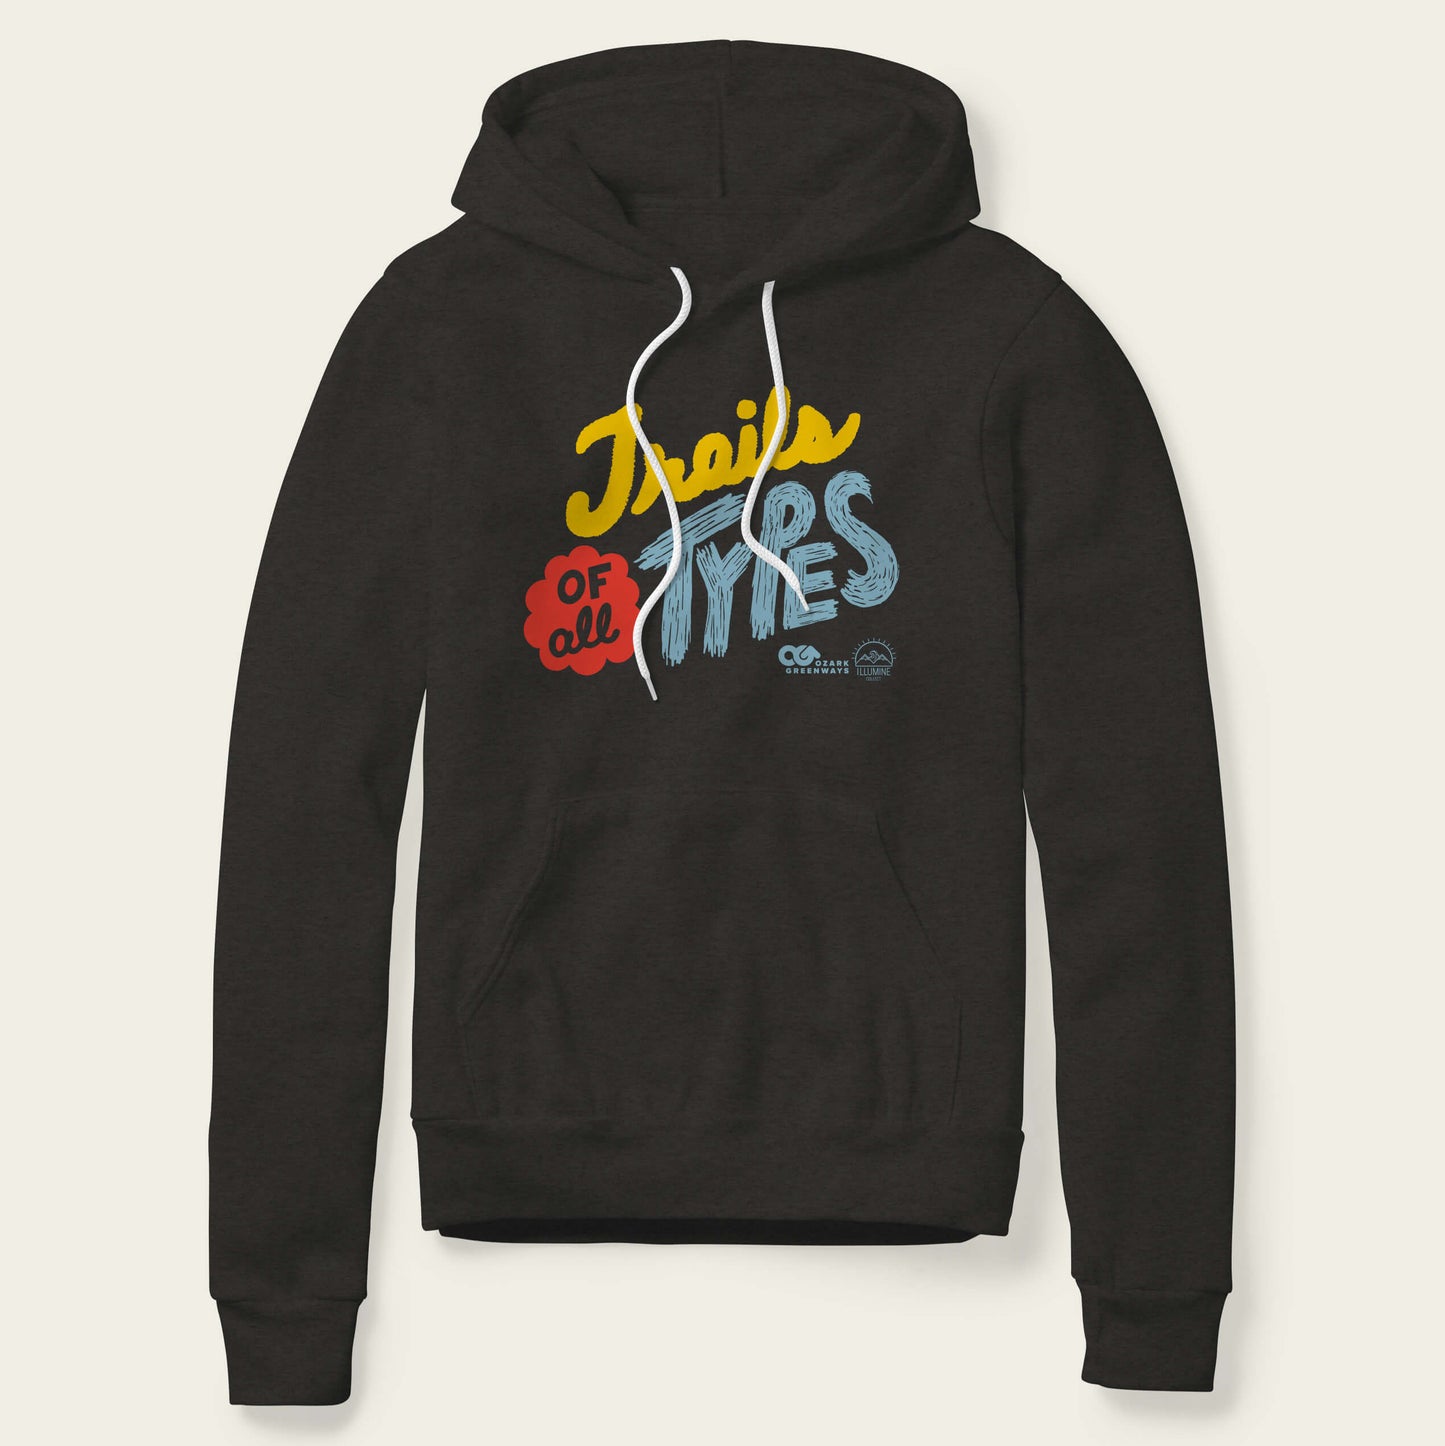 Trails of all Types Hoodie - Black